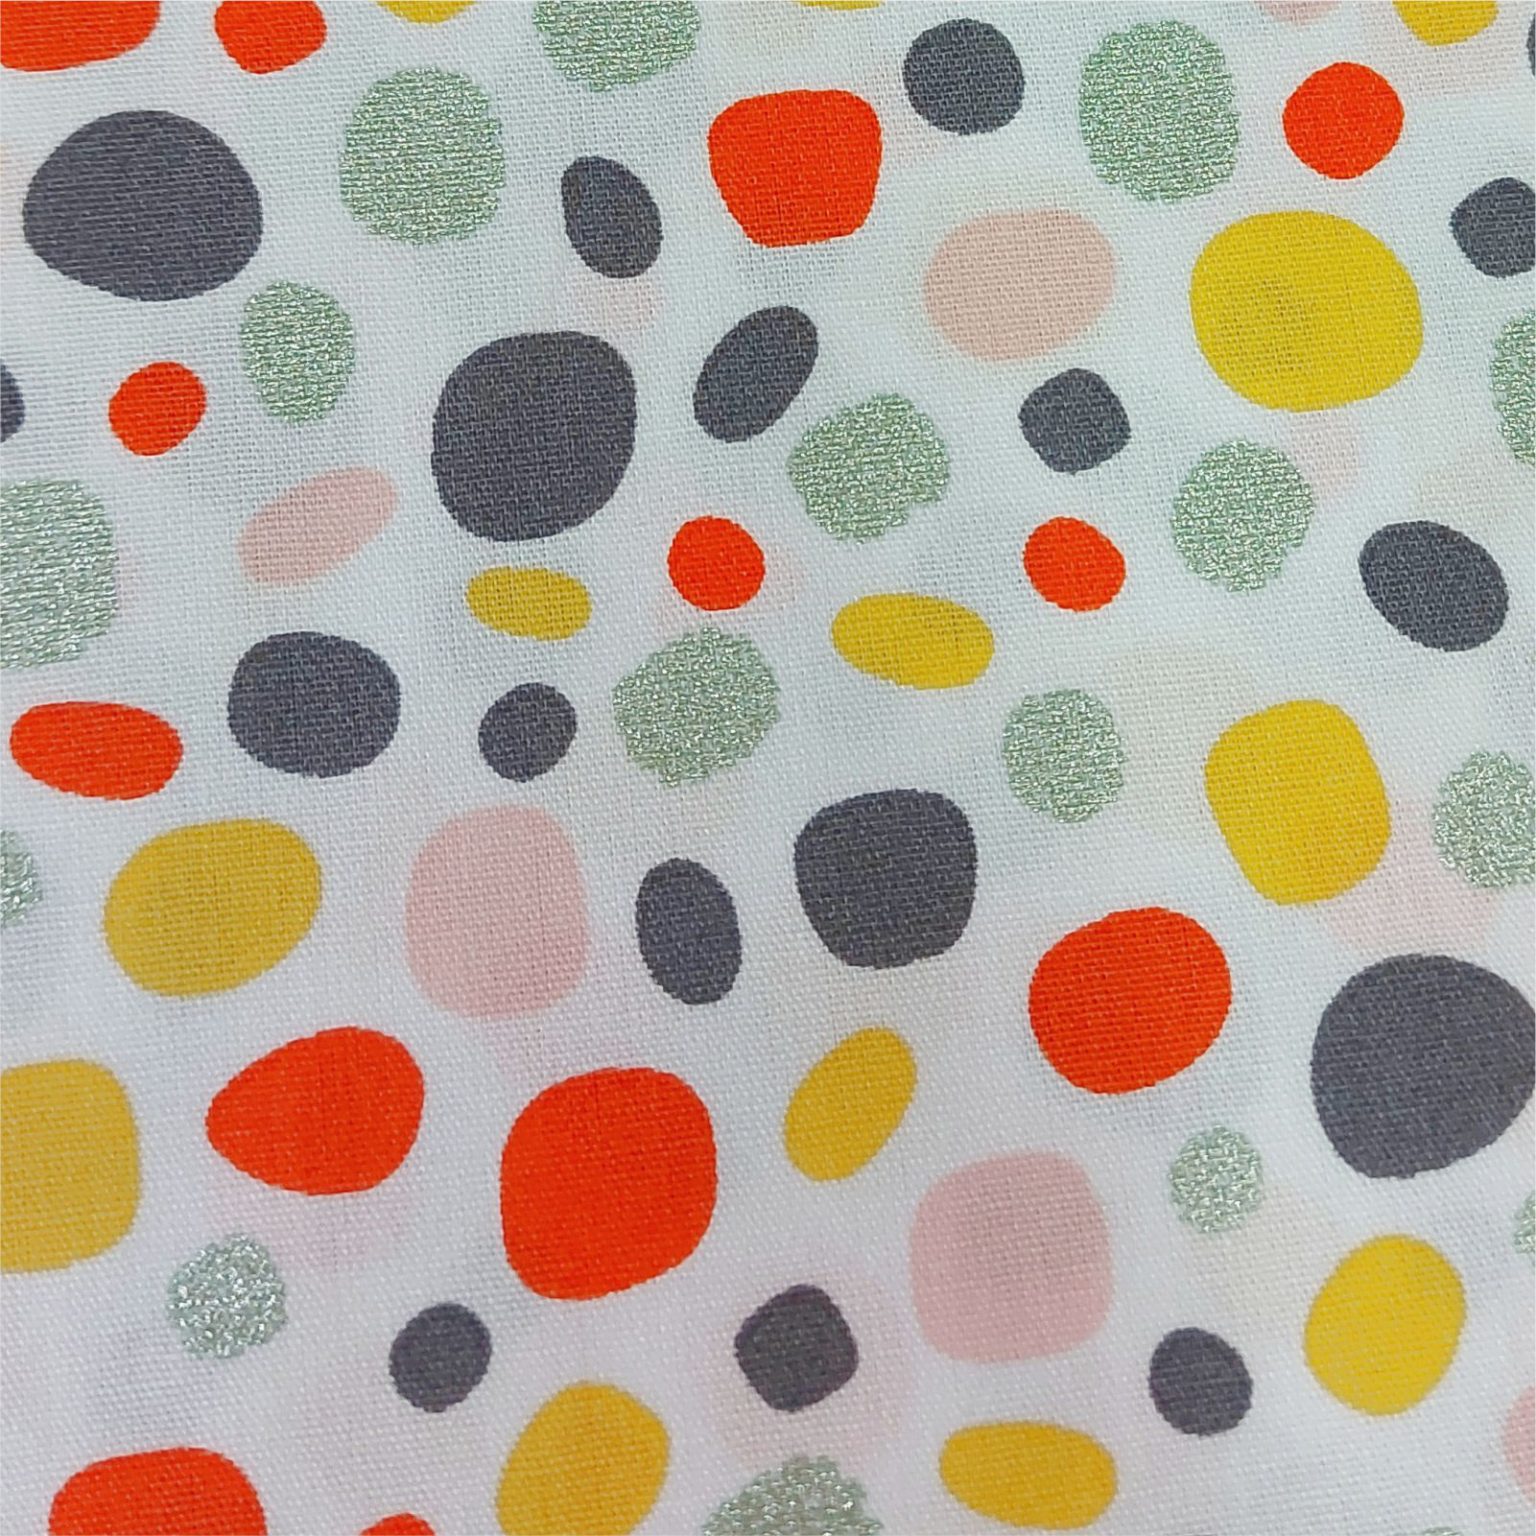 Glittter Spots on white poplin cotton fabric at More Sewing